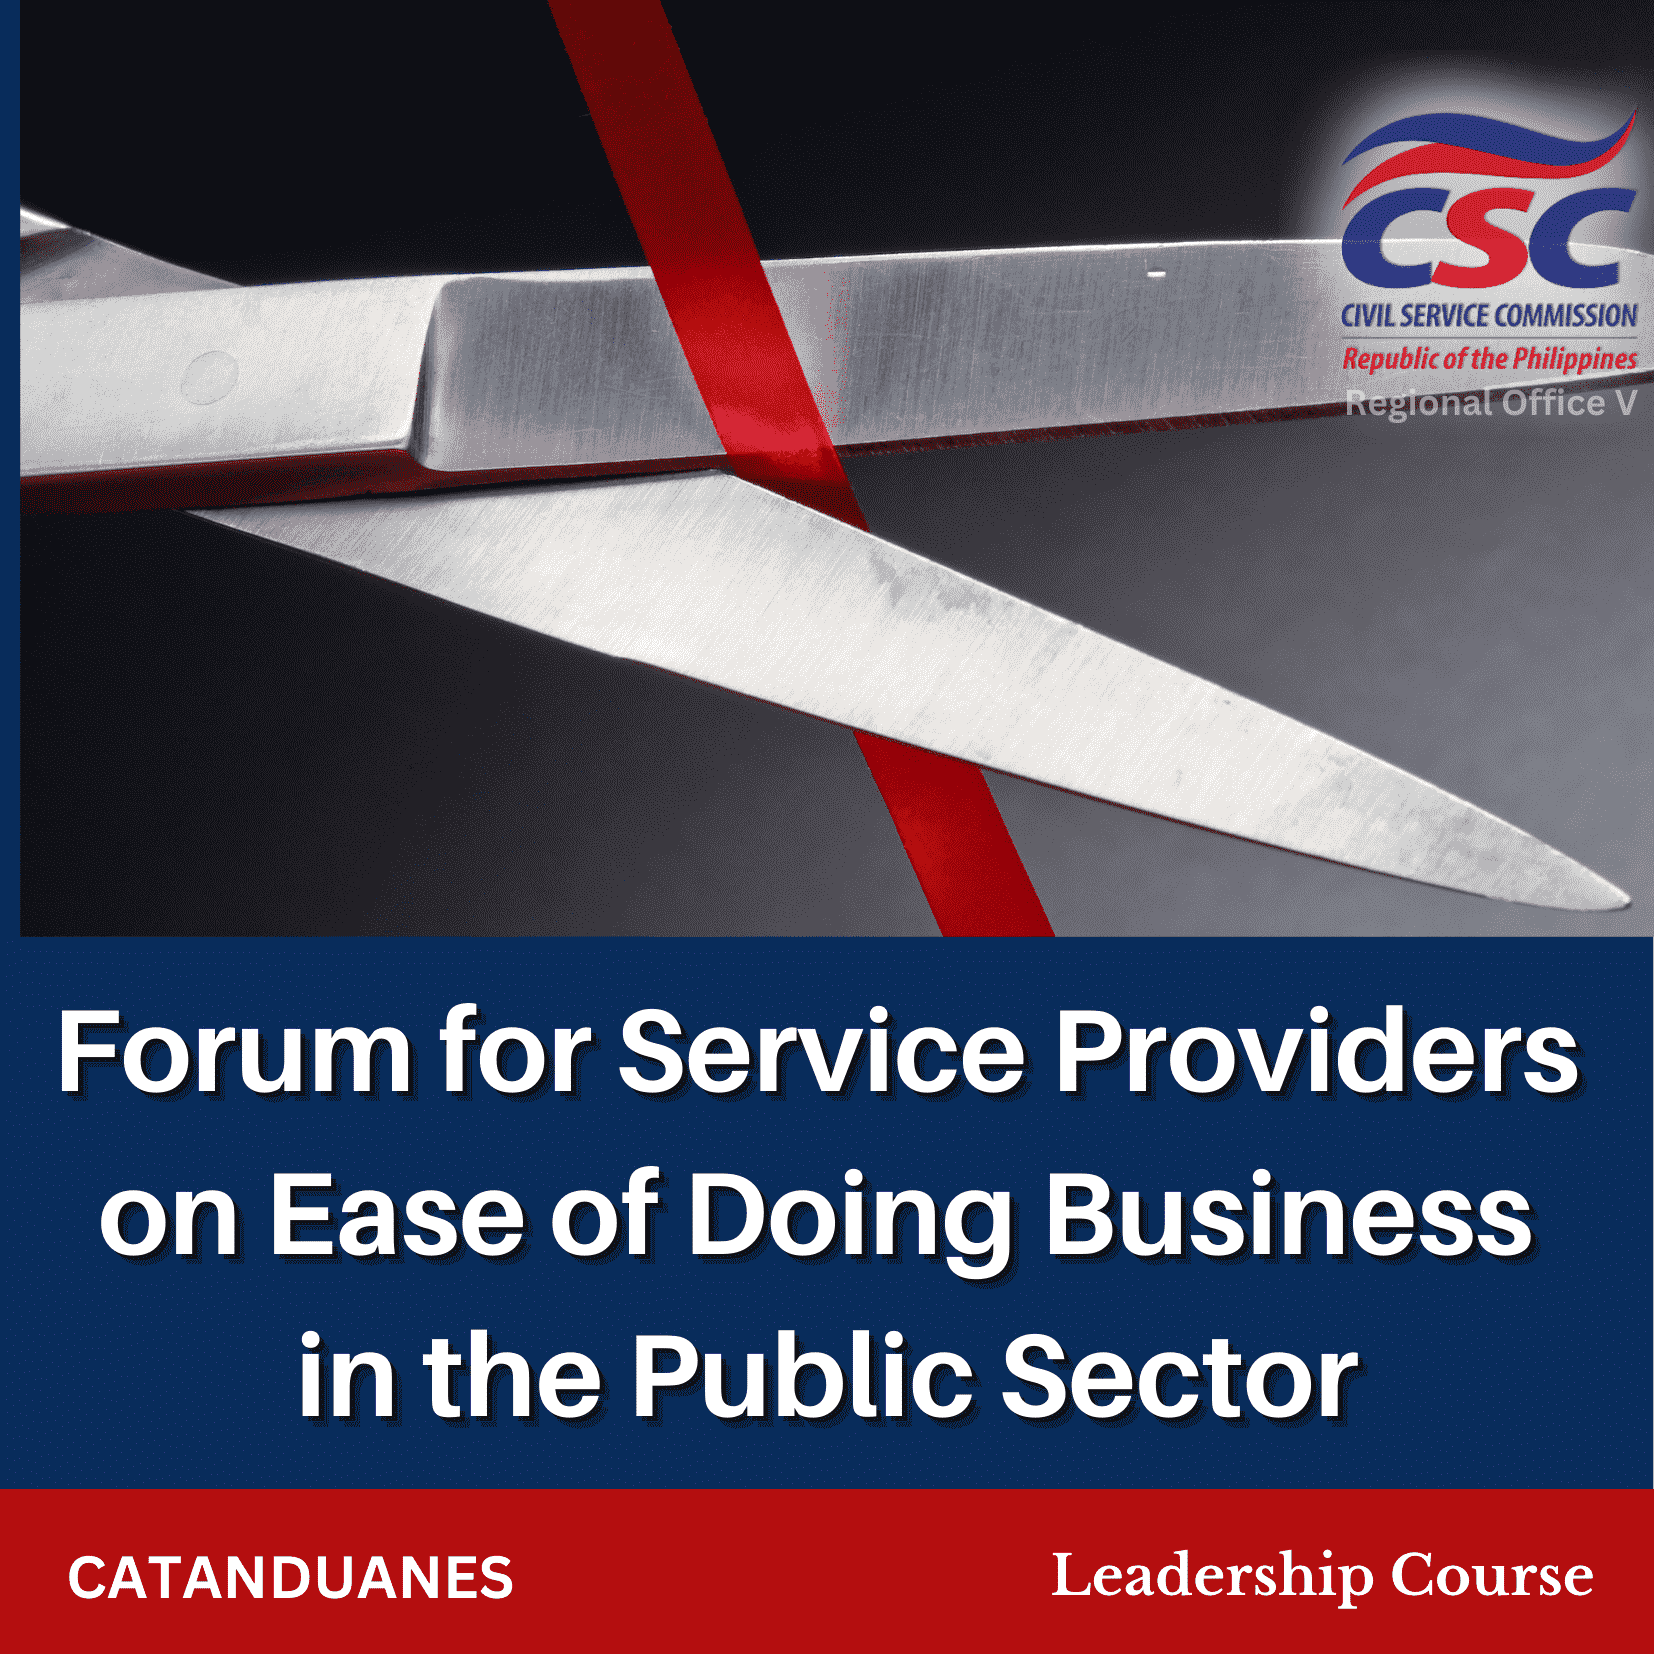 Ease of Doing Business in the Public Sector for Service Providers (Catanduanes)